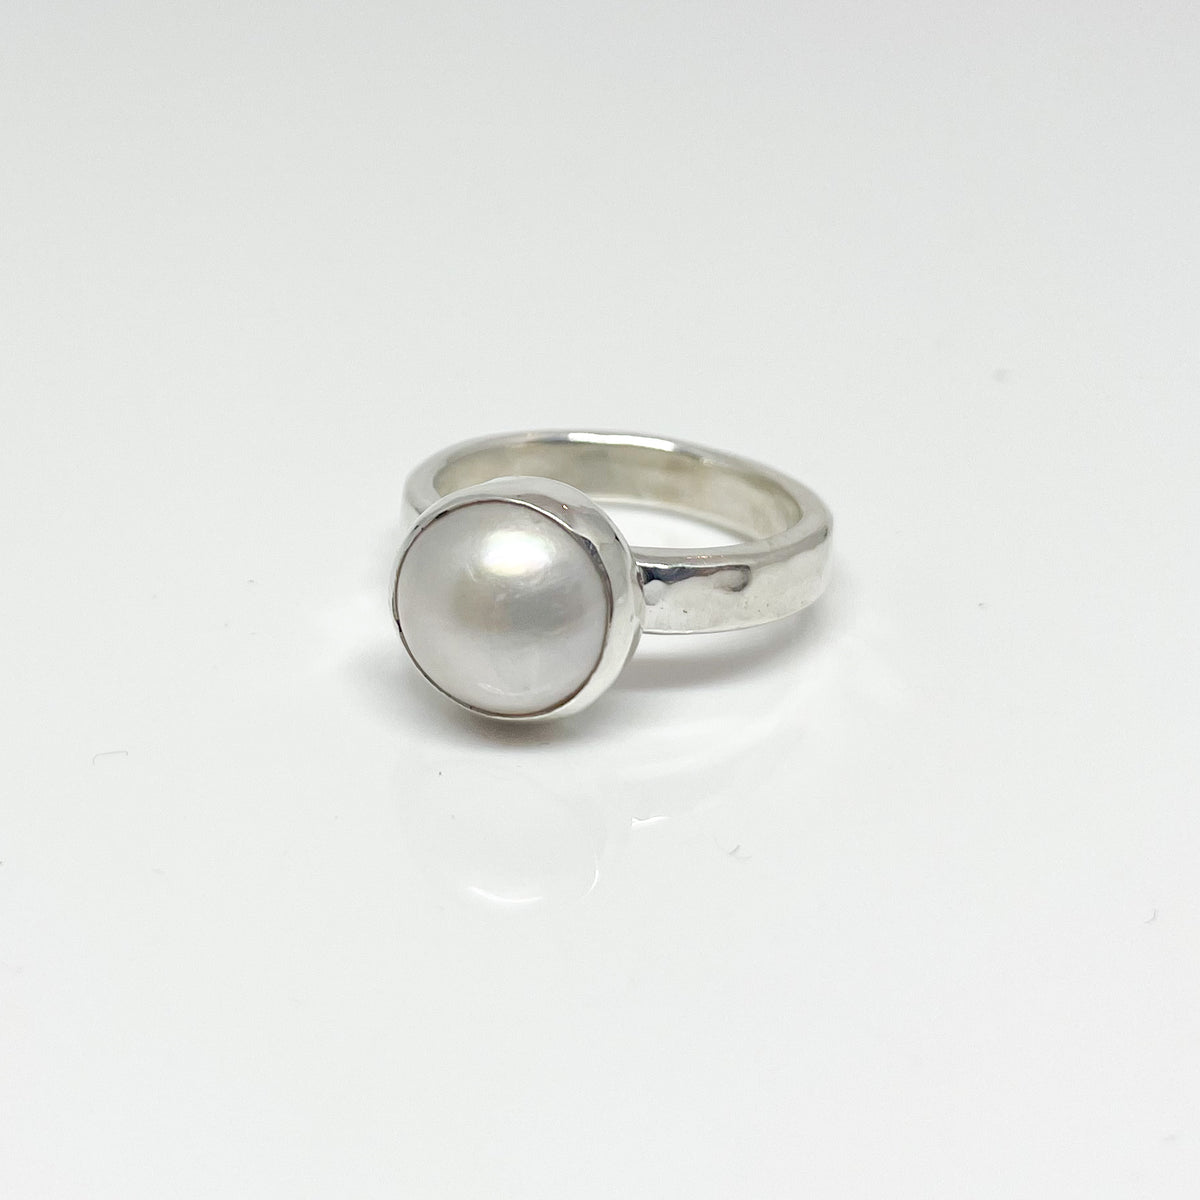 Exotic Leaf Style Pearl Ring (Silver) - Modi Pearls Exotic Leaf Style Pearl  Ring (Silver)